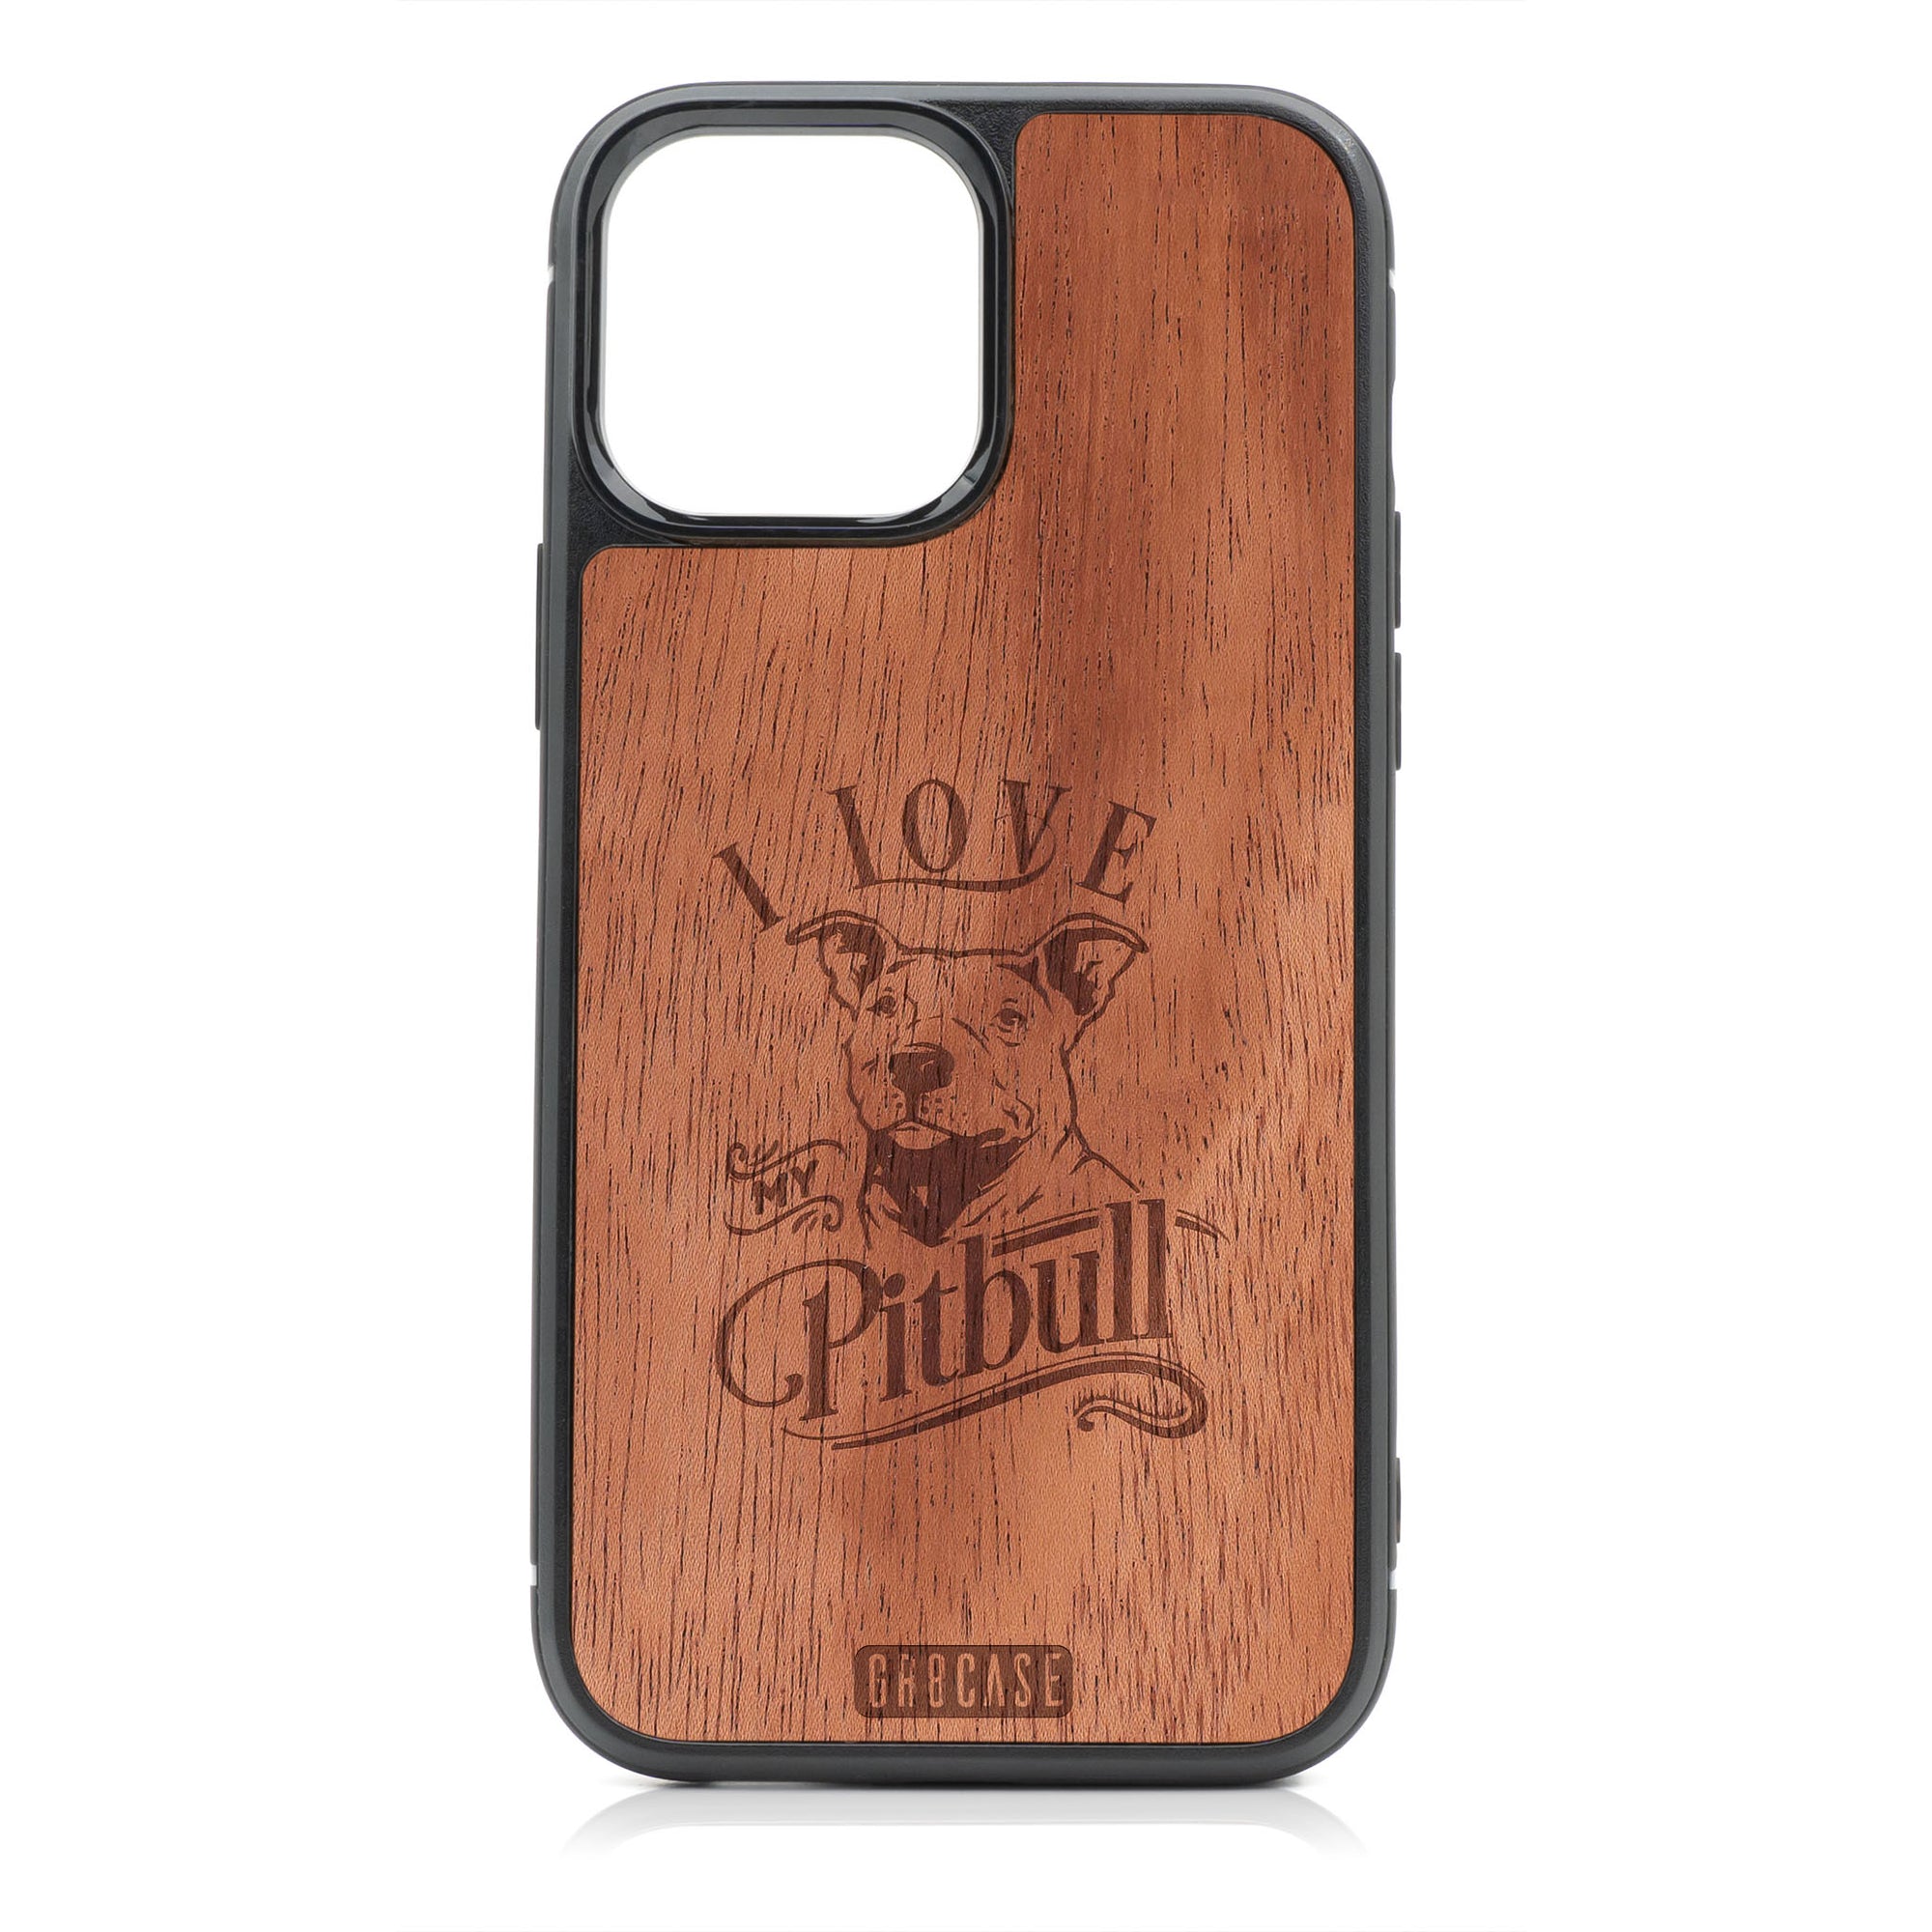 I Love My Pitbull Design Wood Case For iPhone 13 Pro Max